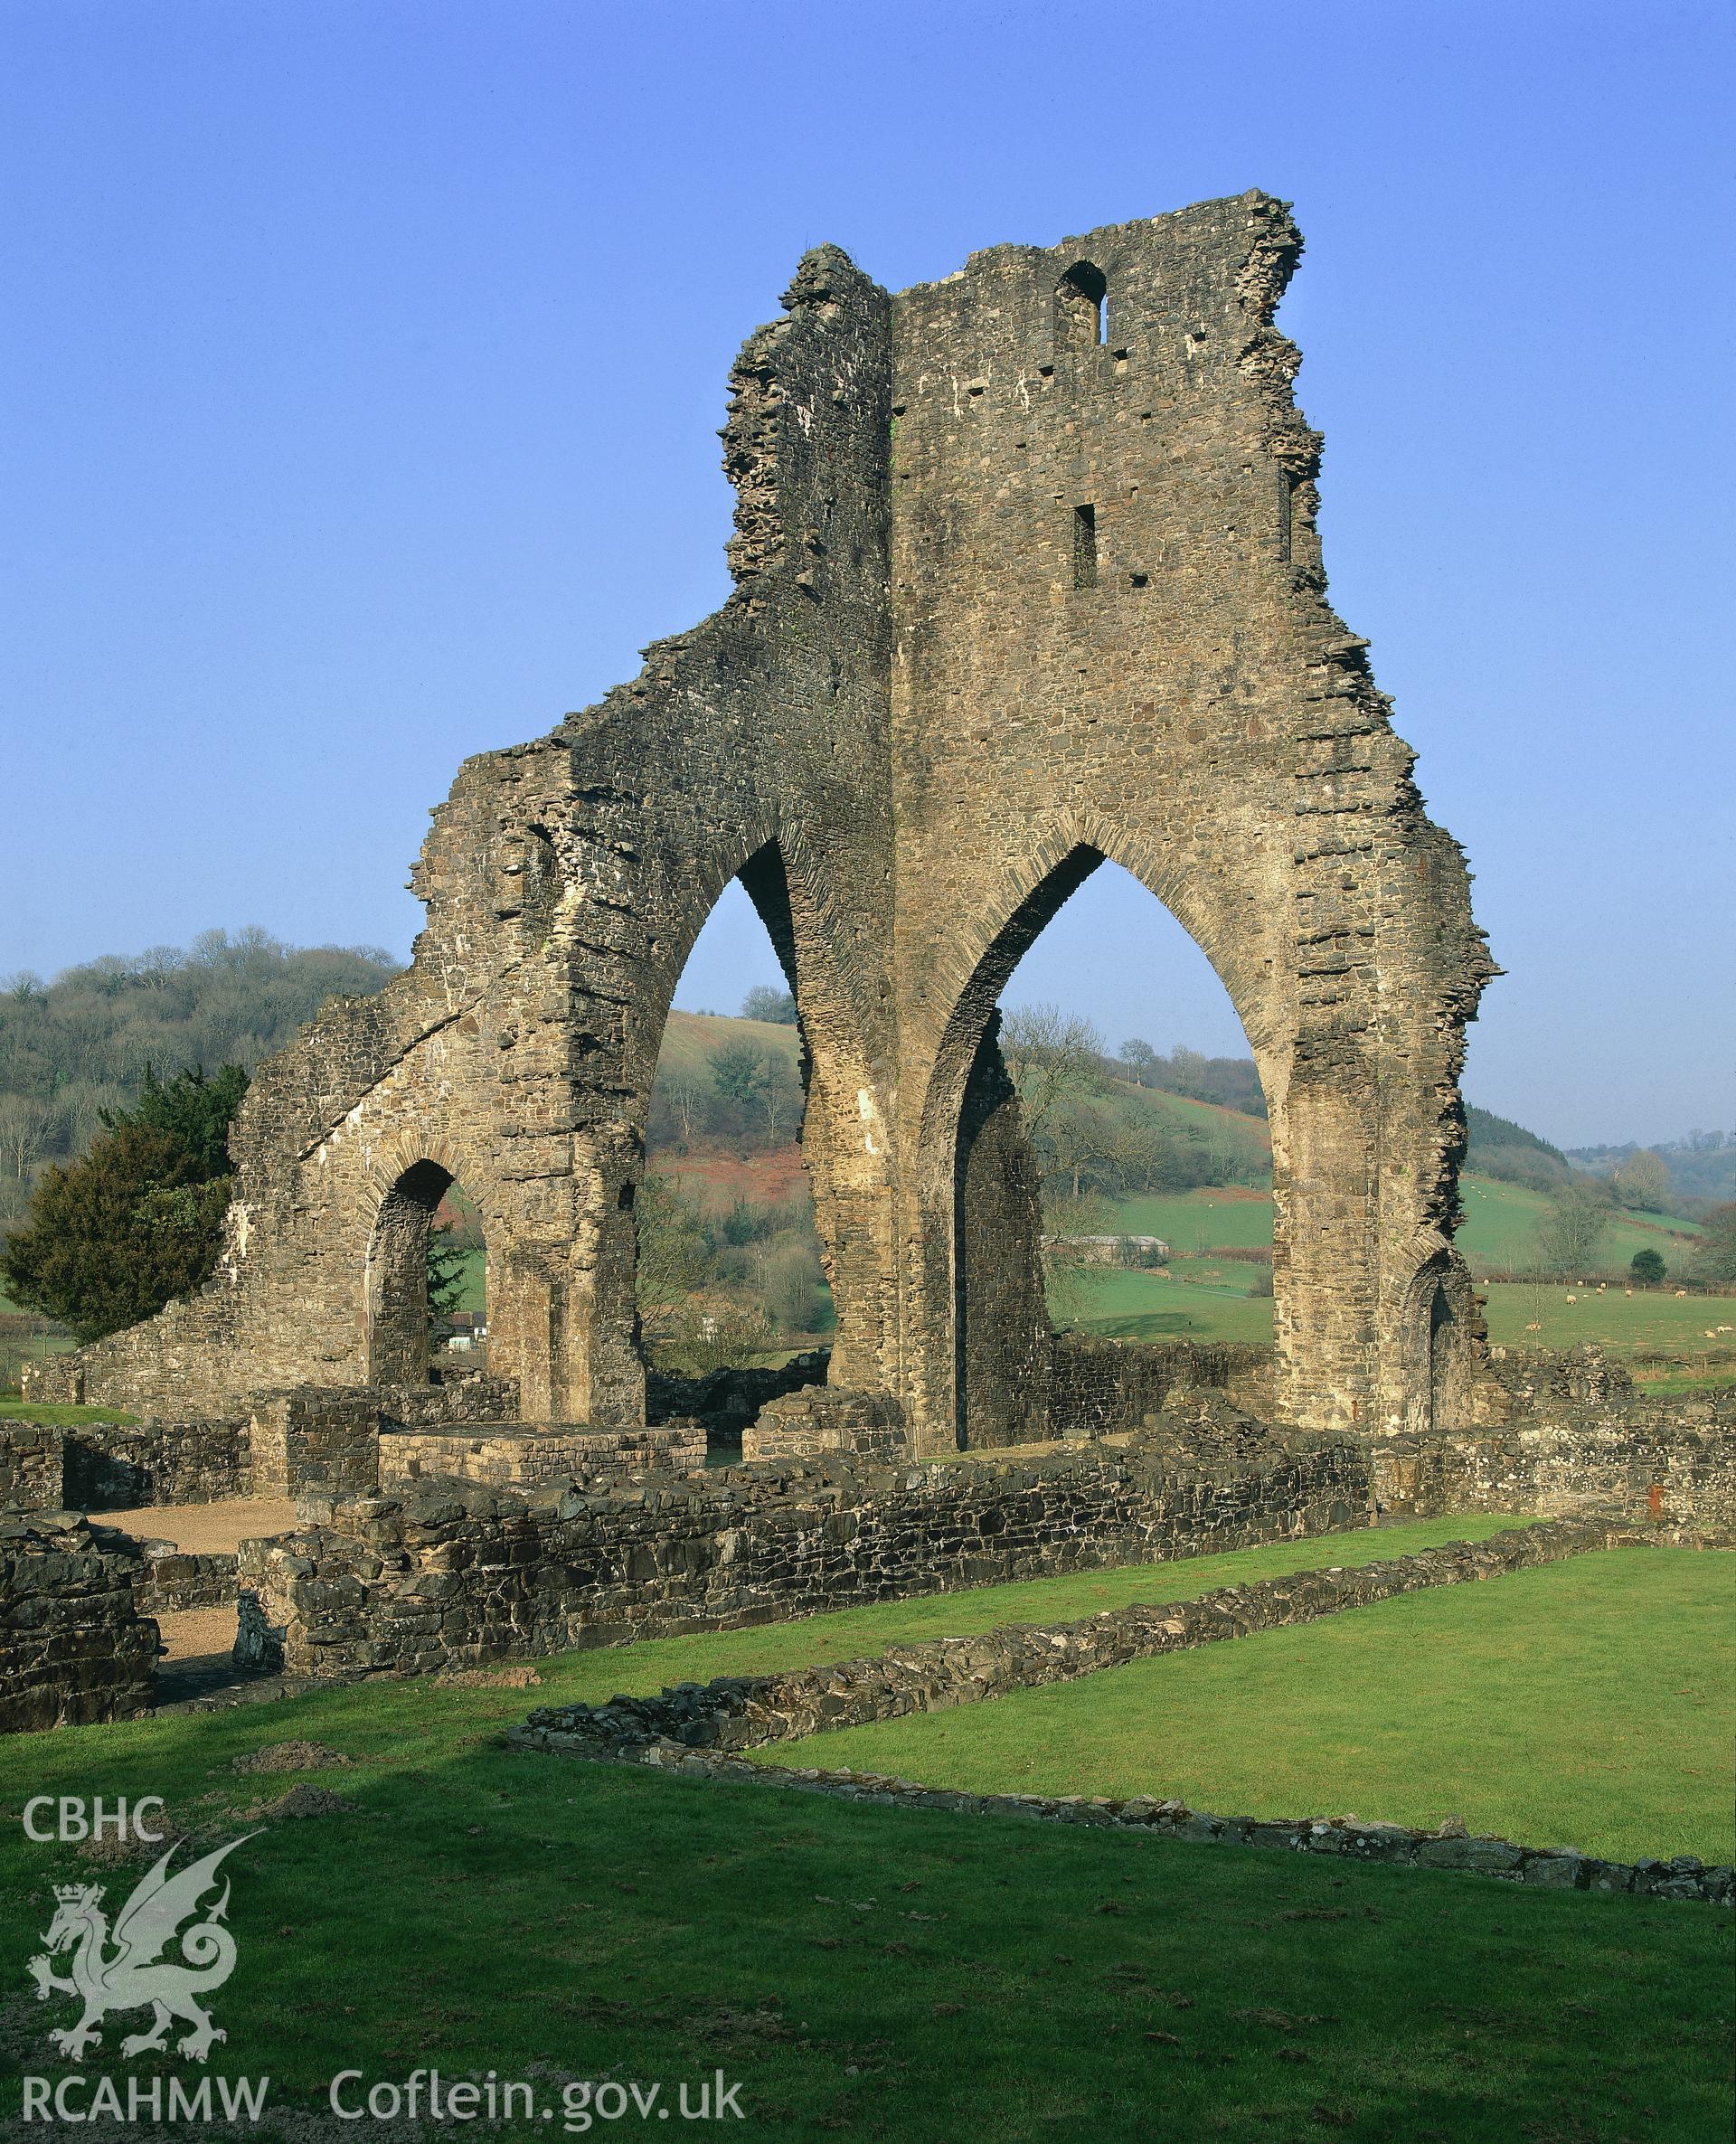 RCAHMW colour transparency showing view of Talley Abbey